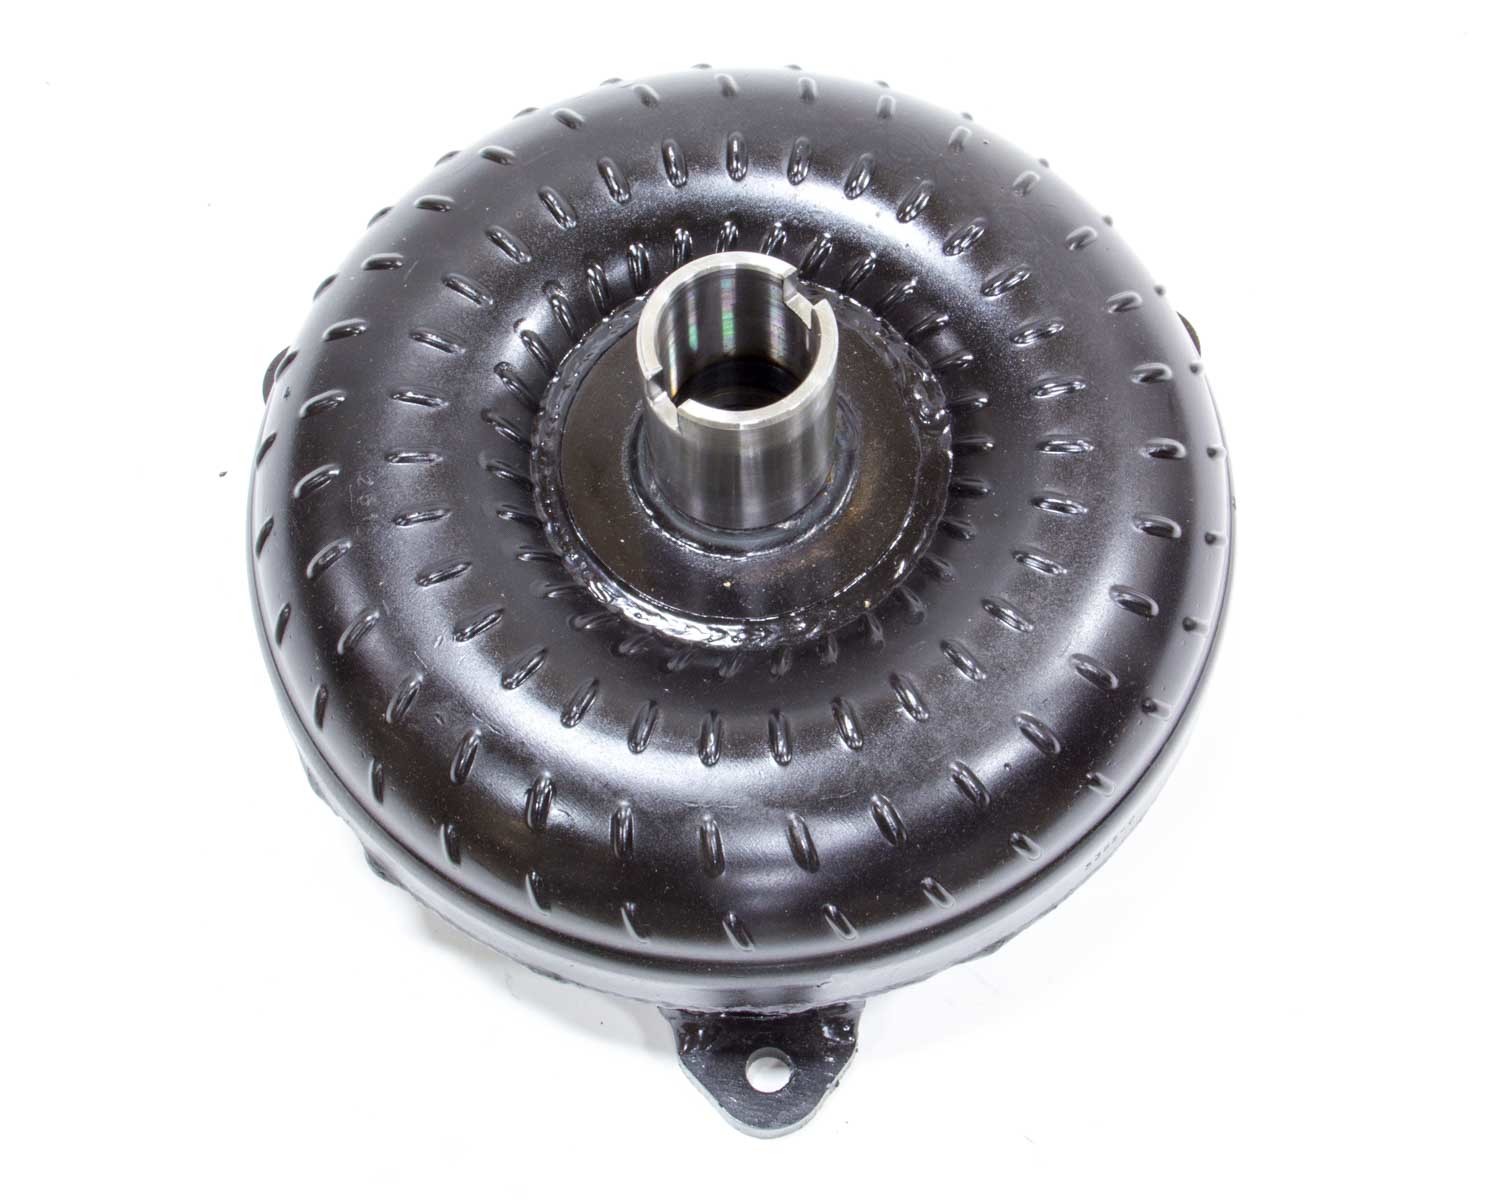 Coan 20416-1 Torque Converter, Competition, 9 in Diameter, 10.750 in Bolt Circle, TH350 / 400, Each